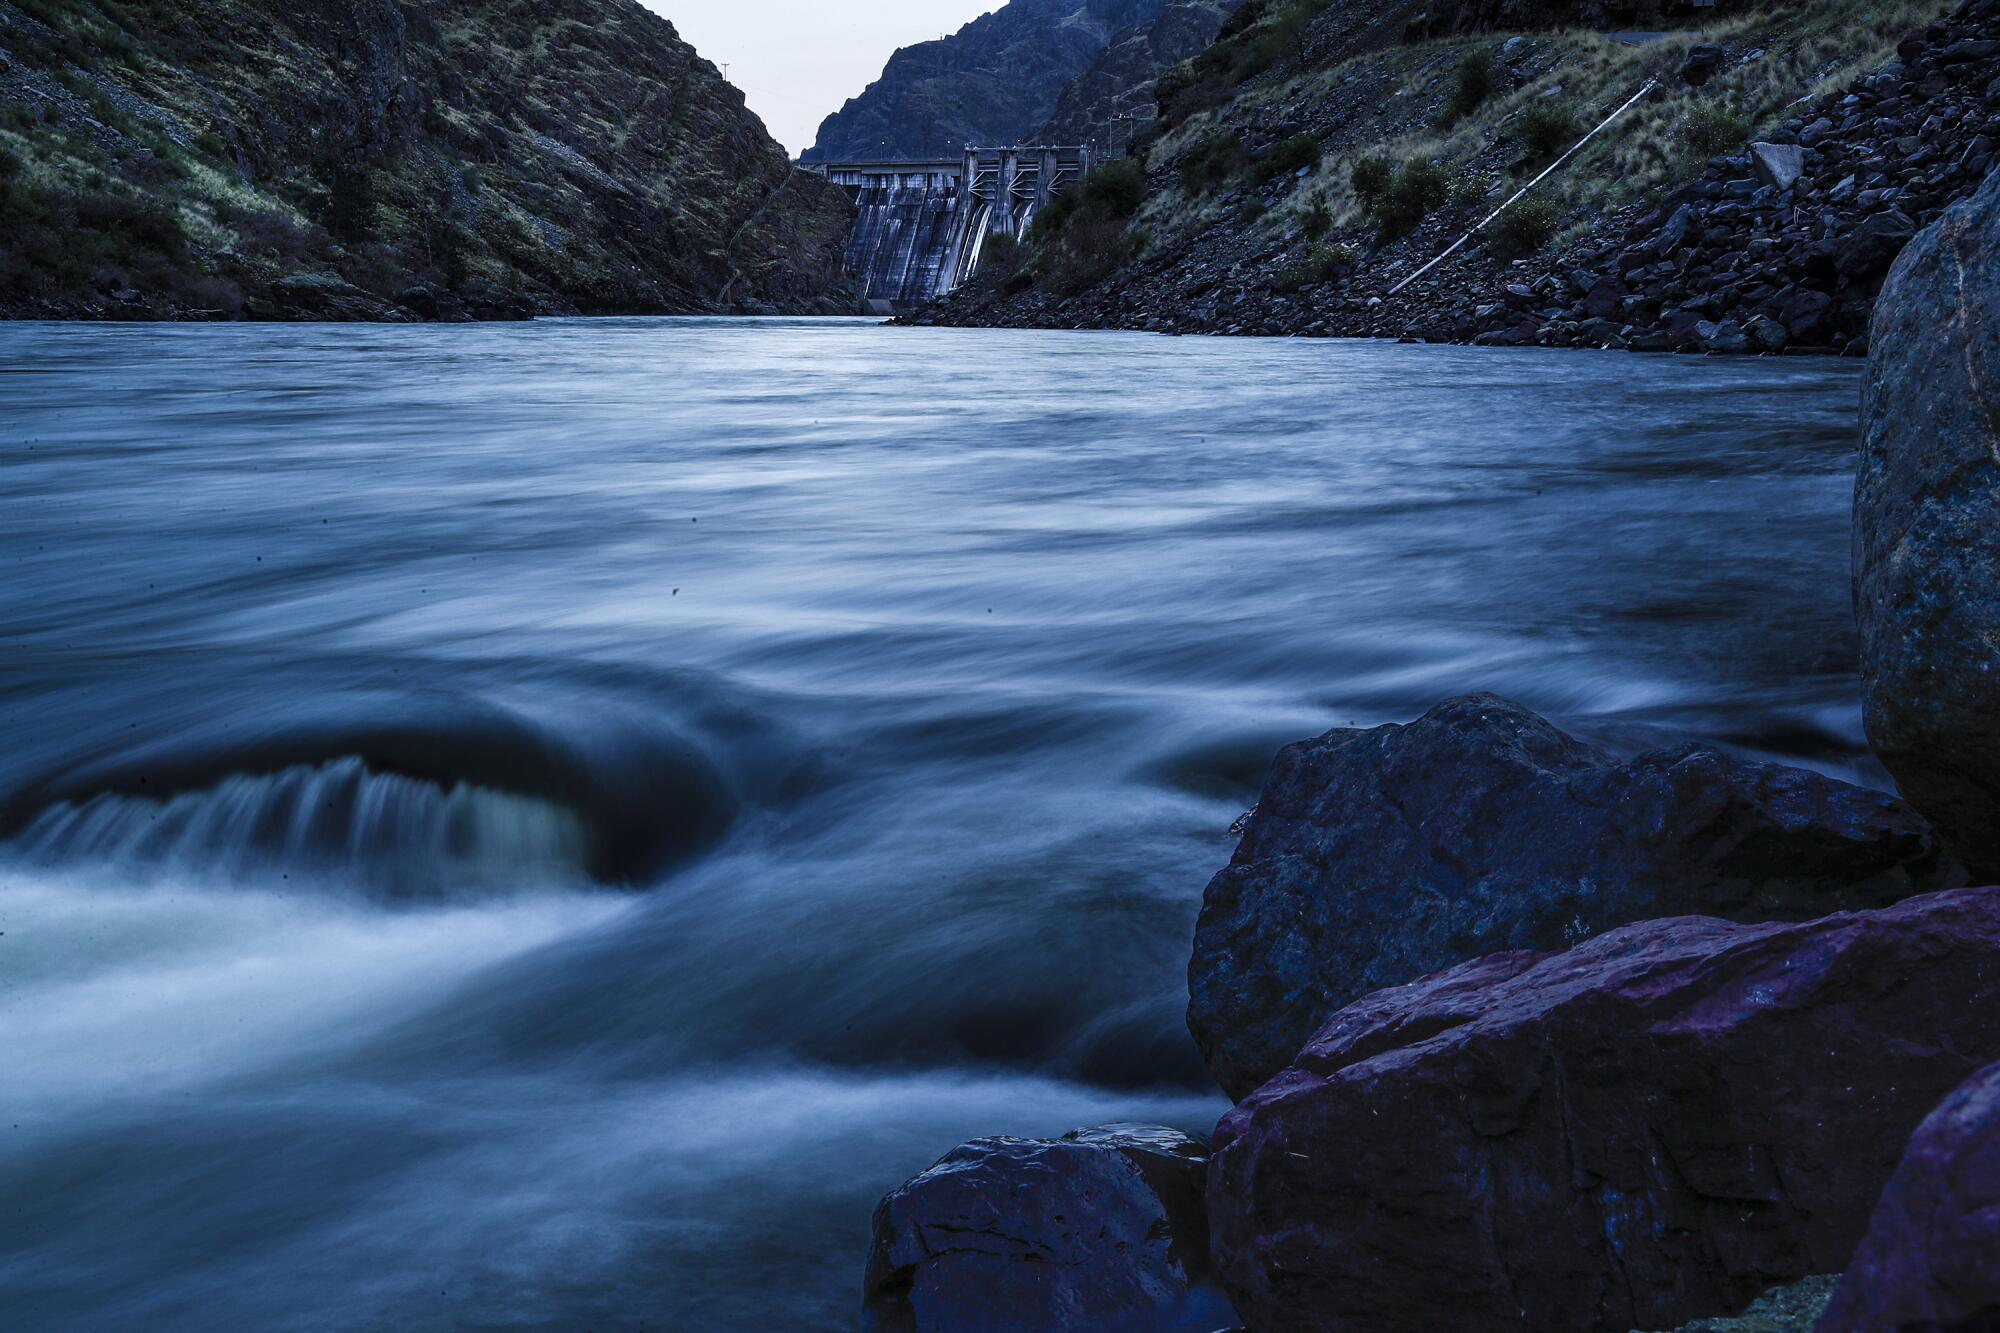 The flow of the Snake River has been fundamentally altered by Hells Canyon Dam.